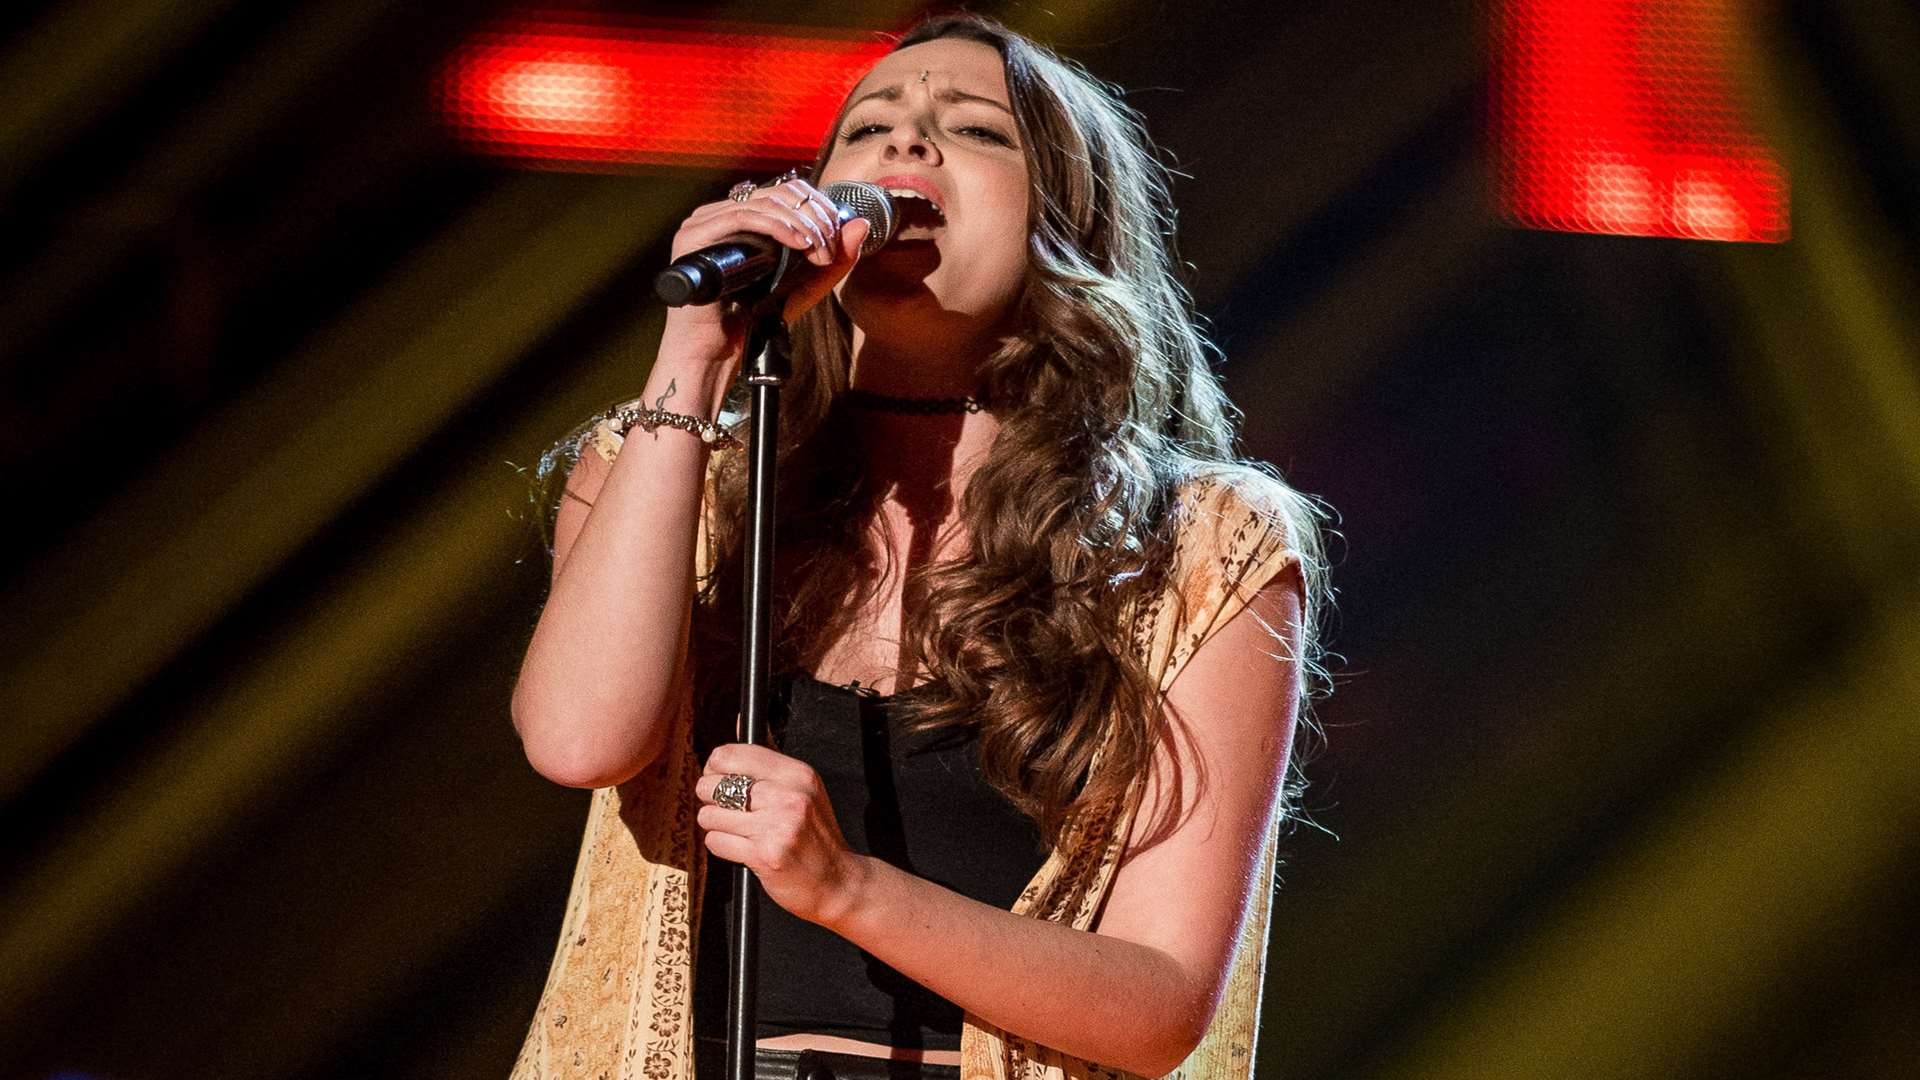 Hannah performing on The Voice.